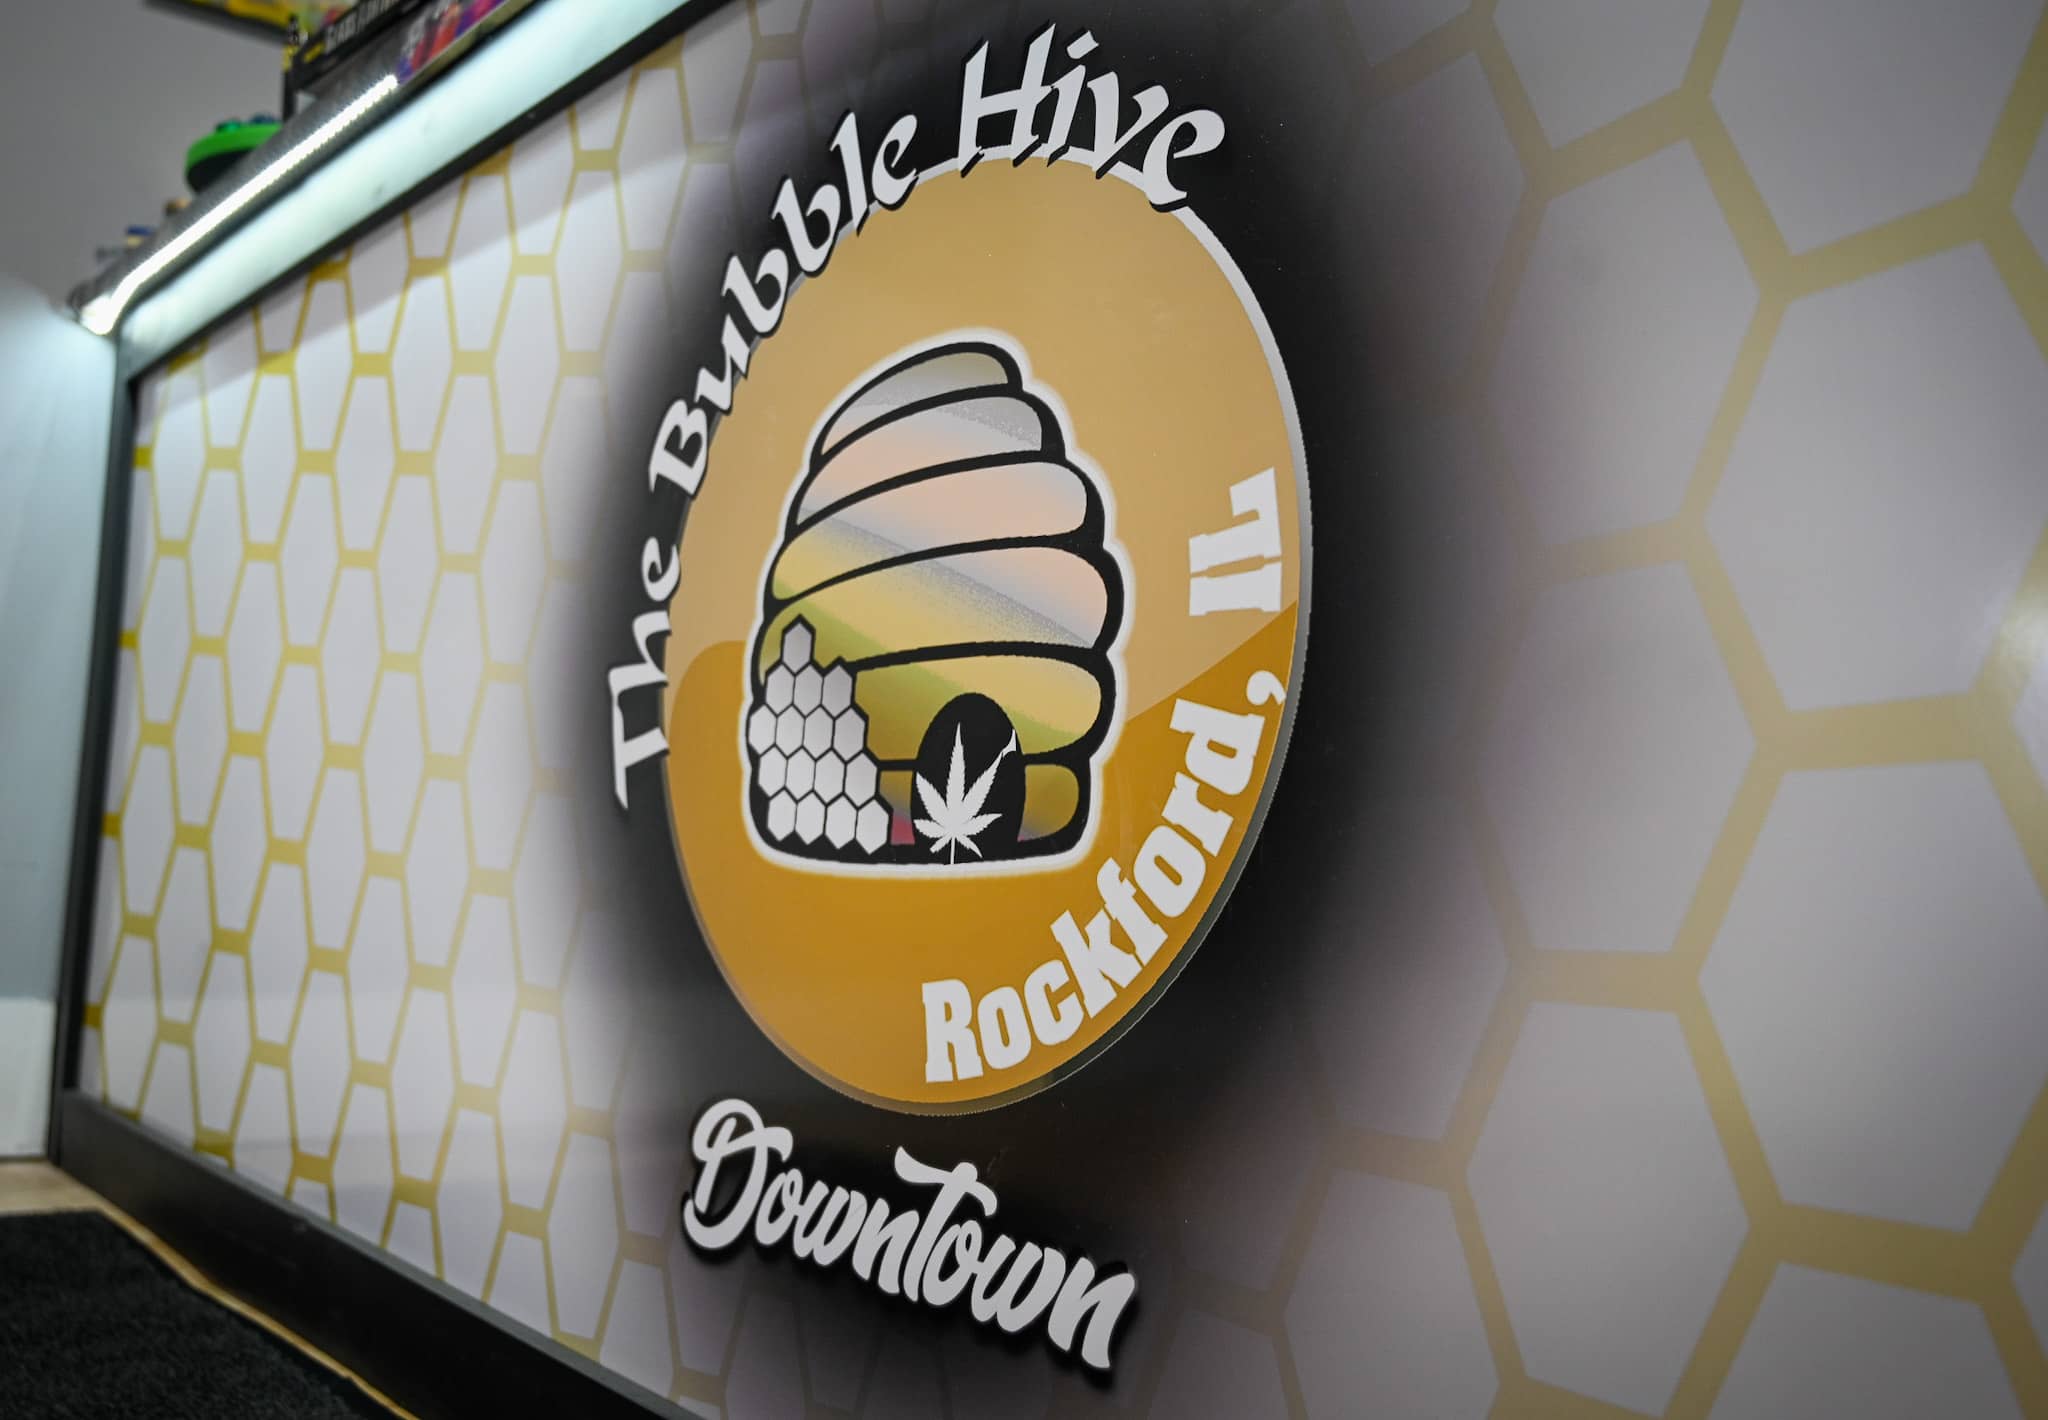 The Bubble Hive Downtown